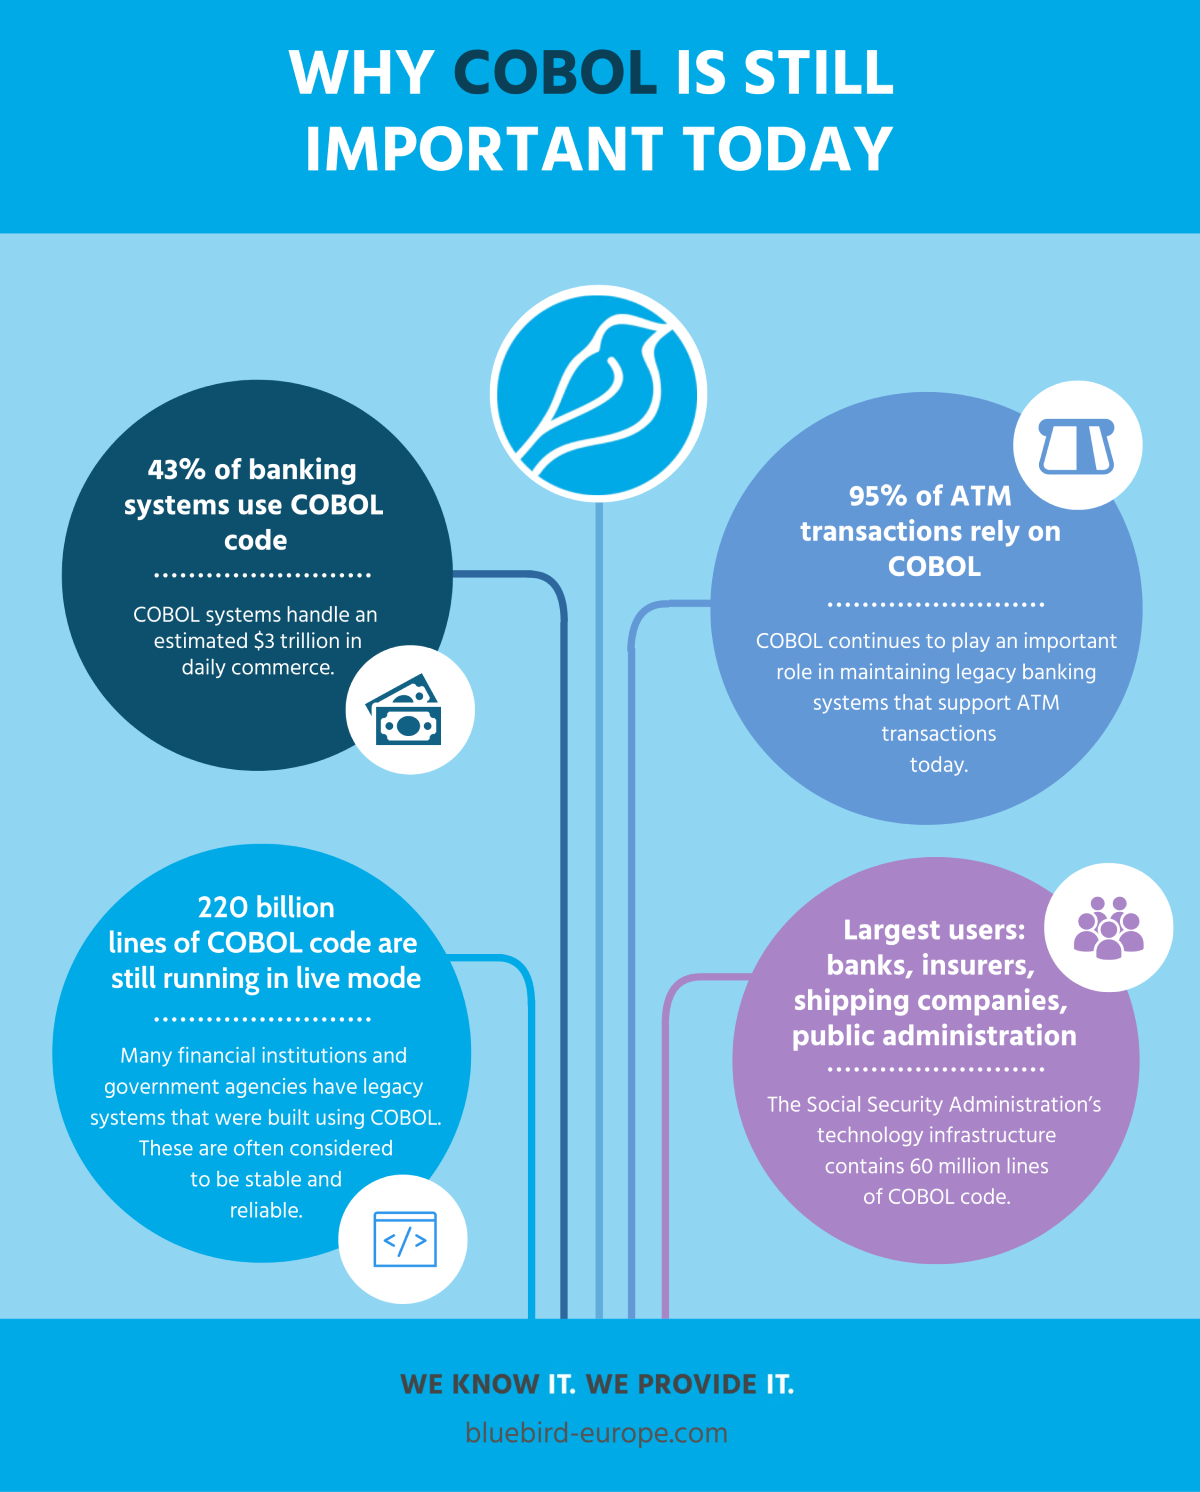 Infographic about why COBOL is still important.